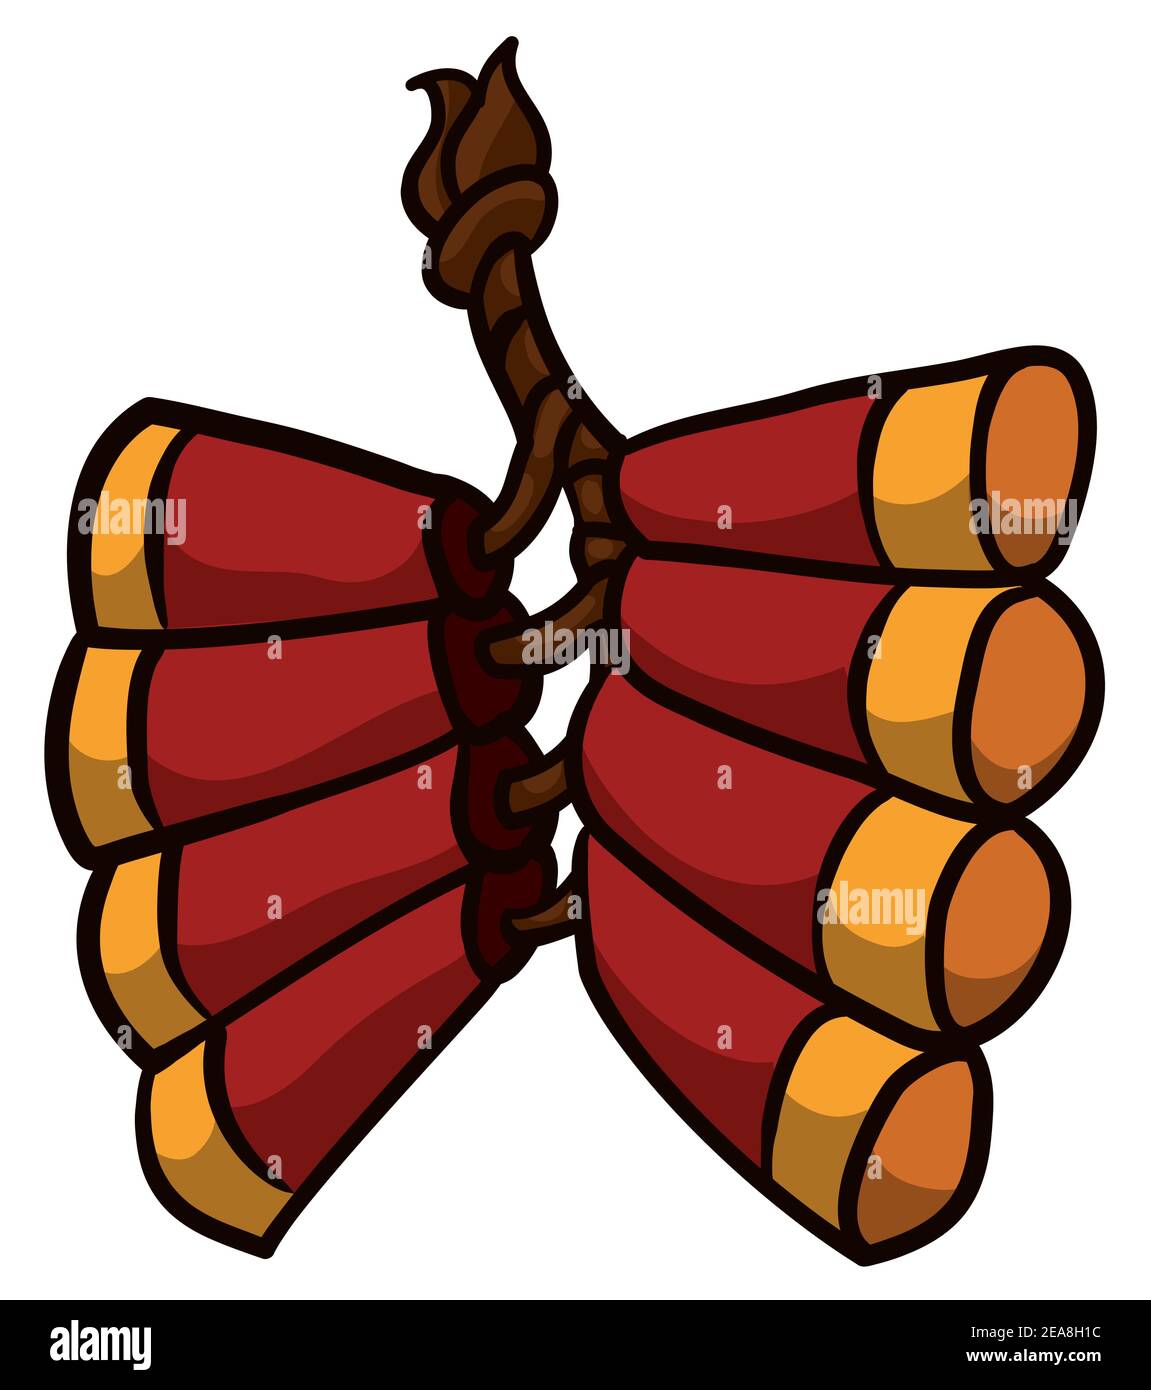 Traditional firecrackers tubes and tied string to celebrate the Chinese New Year, isolated over white background. Stock Vector